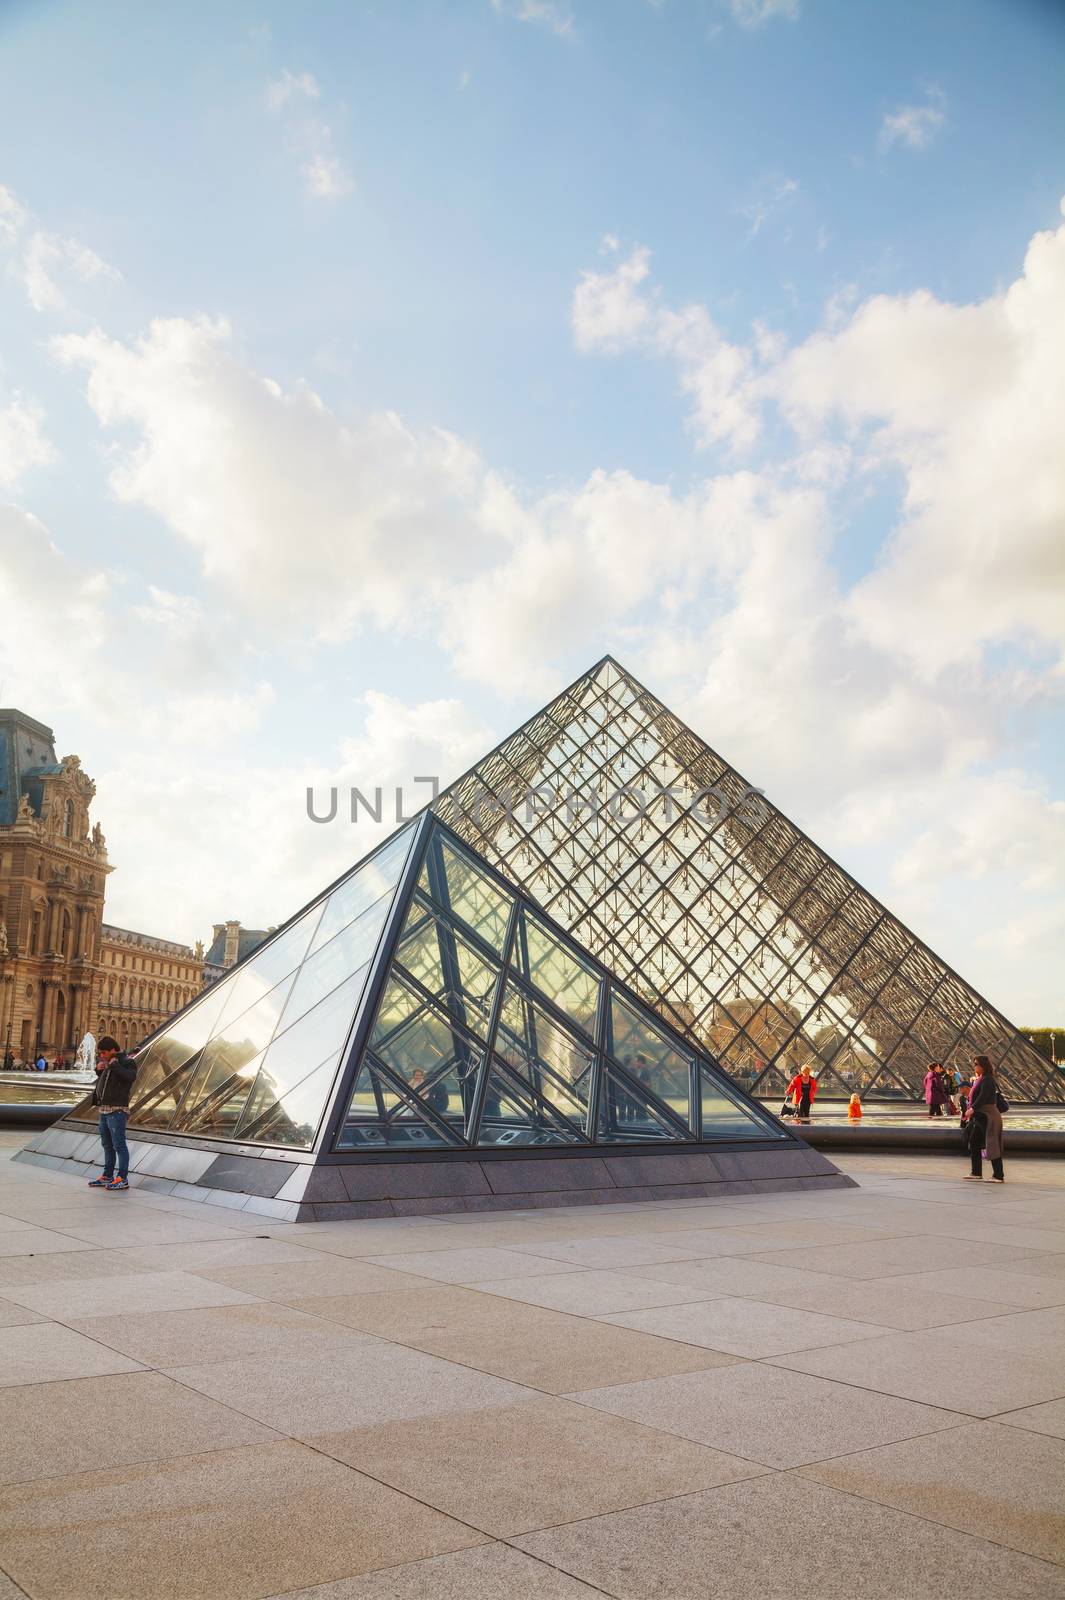 PARIS - OCTOBER 9: The Louvre Pyramid on October 9, 2014 in Paris, France. It serves as the main entrance to the Louvre Museum. Completed in 1989 it has become a landmark of Paris.